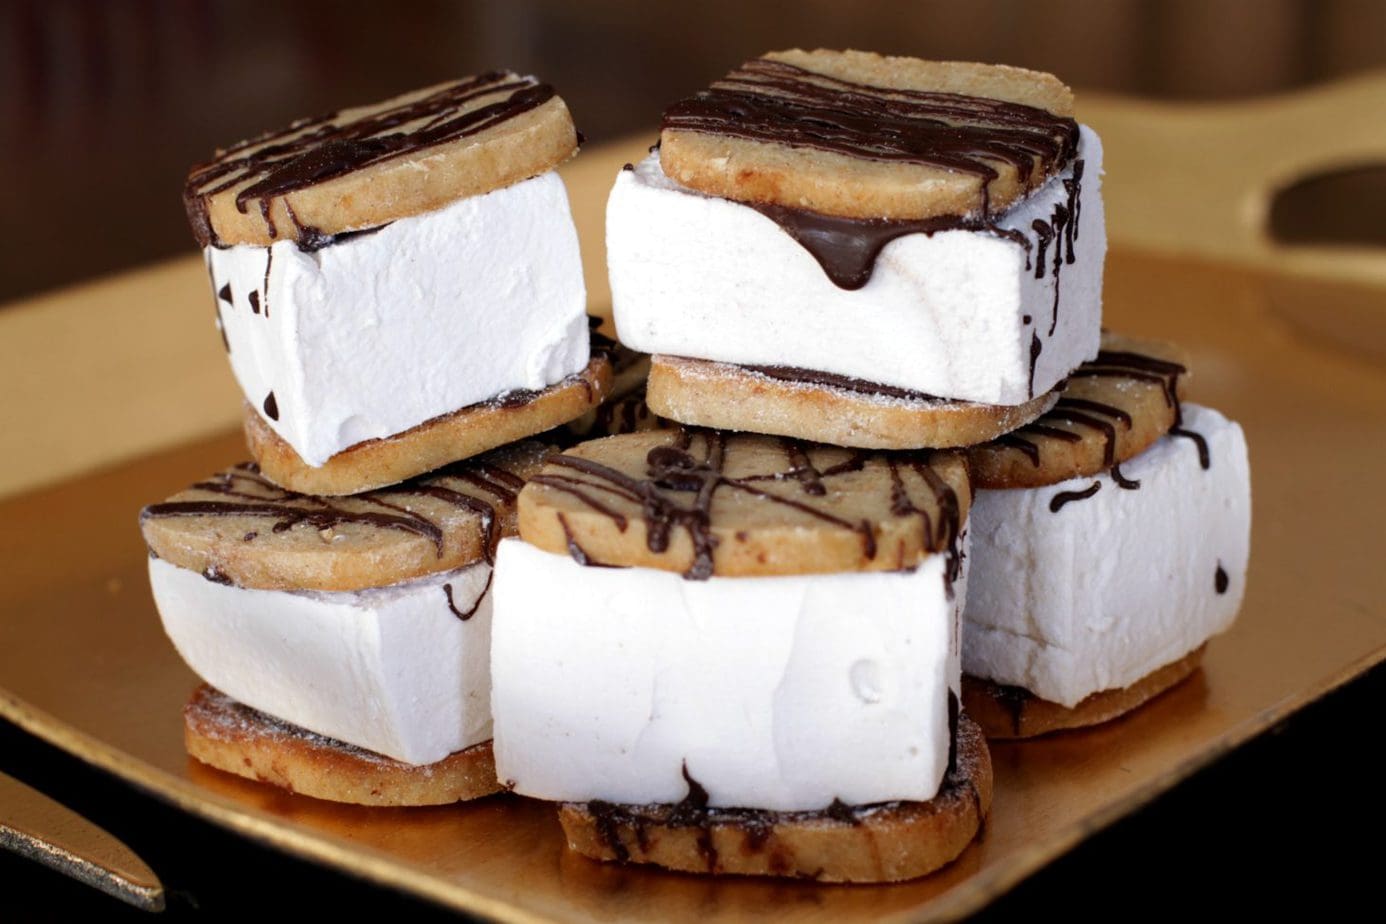 S'mores are a campfire favourite you can create right from scratch. Then enjoy these soft, vanilla flavoured marshmallows sandwiched between crumbly graham cookies...hot or cold! #smores #marshmallows #dessert #grahamcrackers